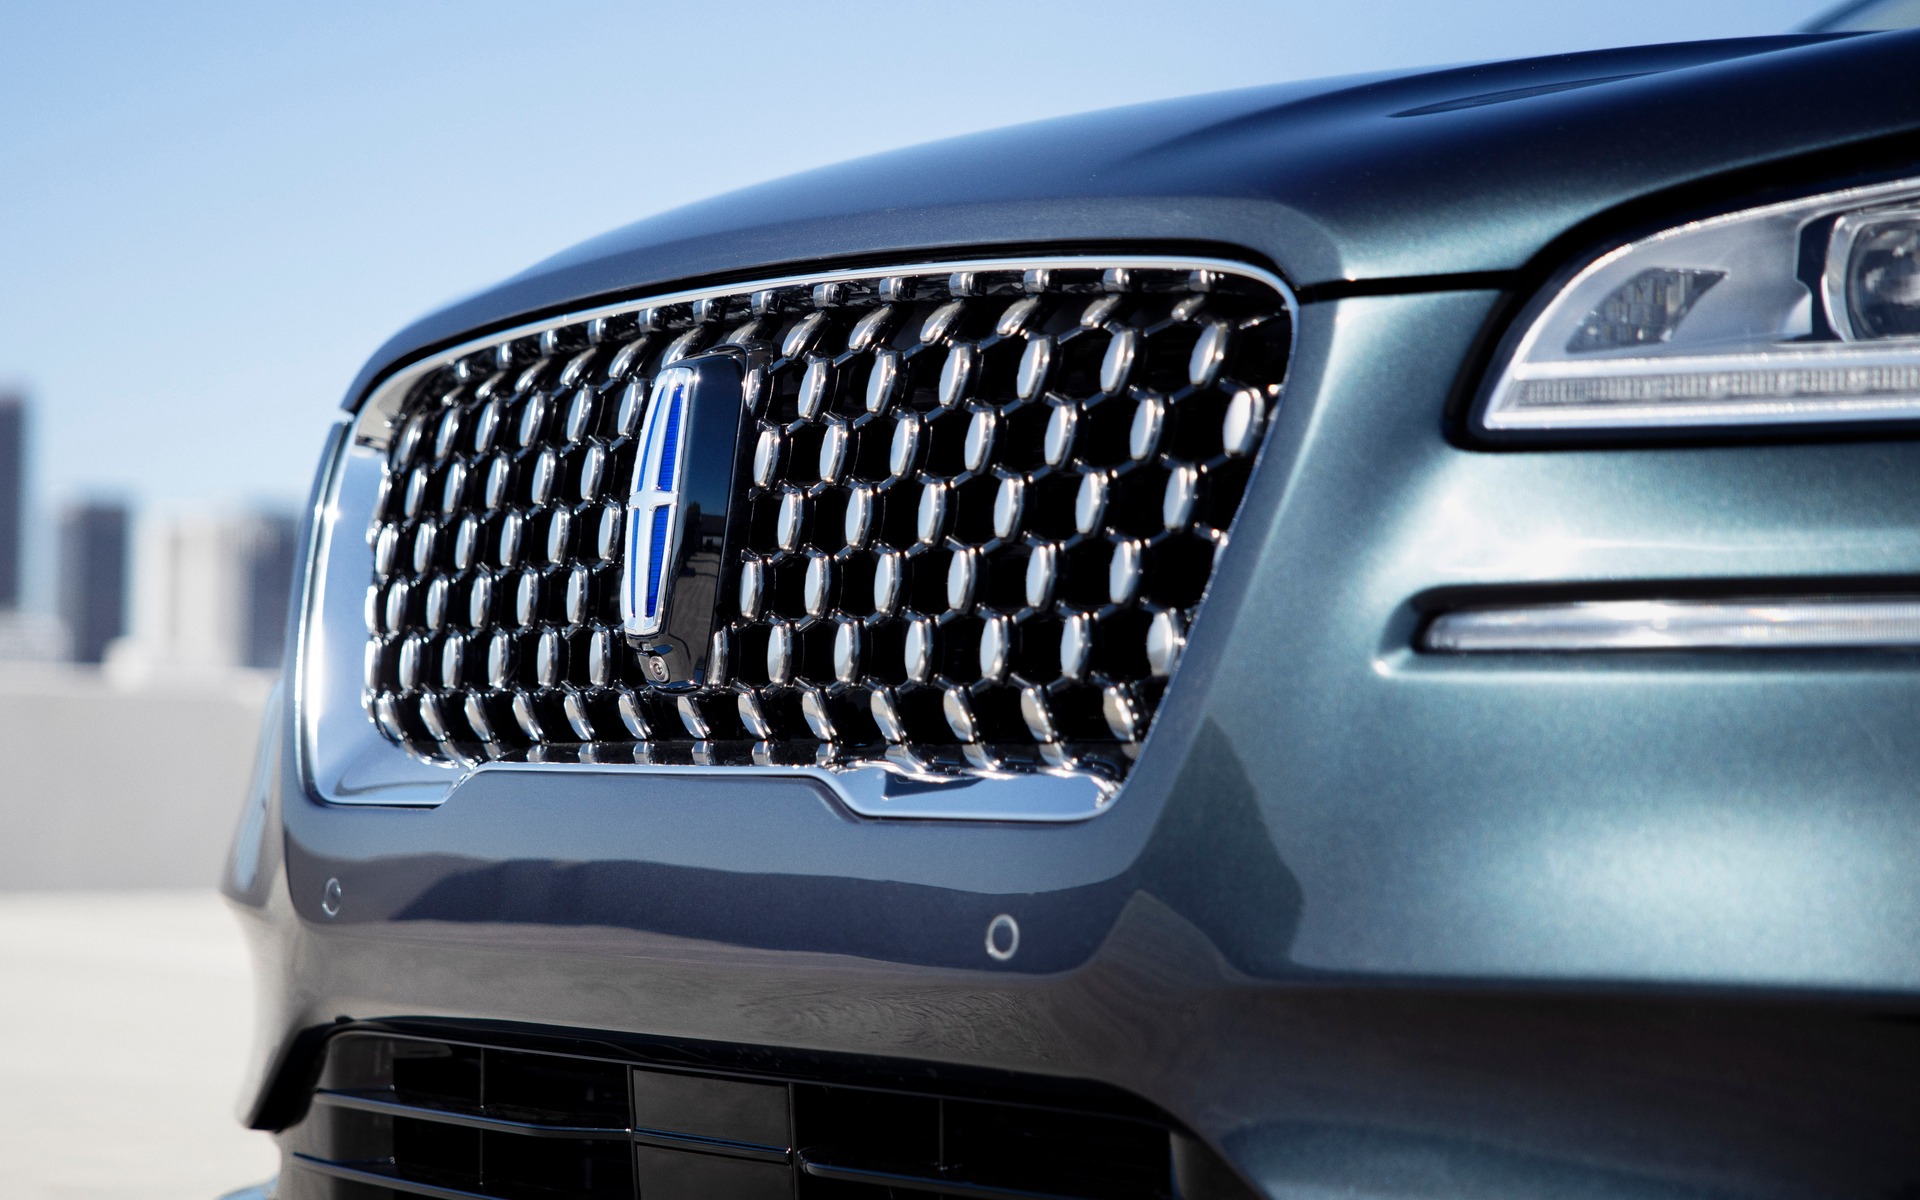 More Details About Lincoln’s Electric SUV The Car Guide